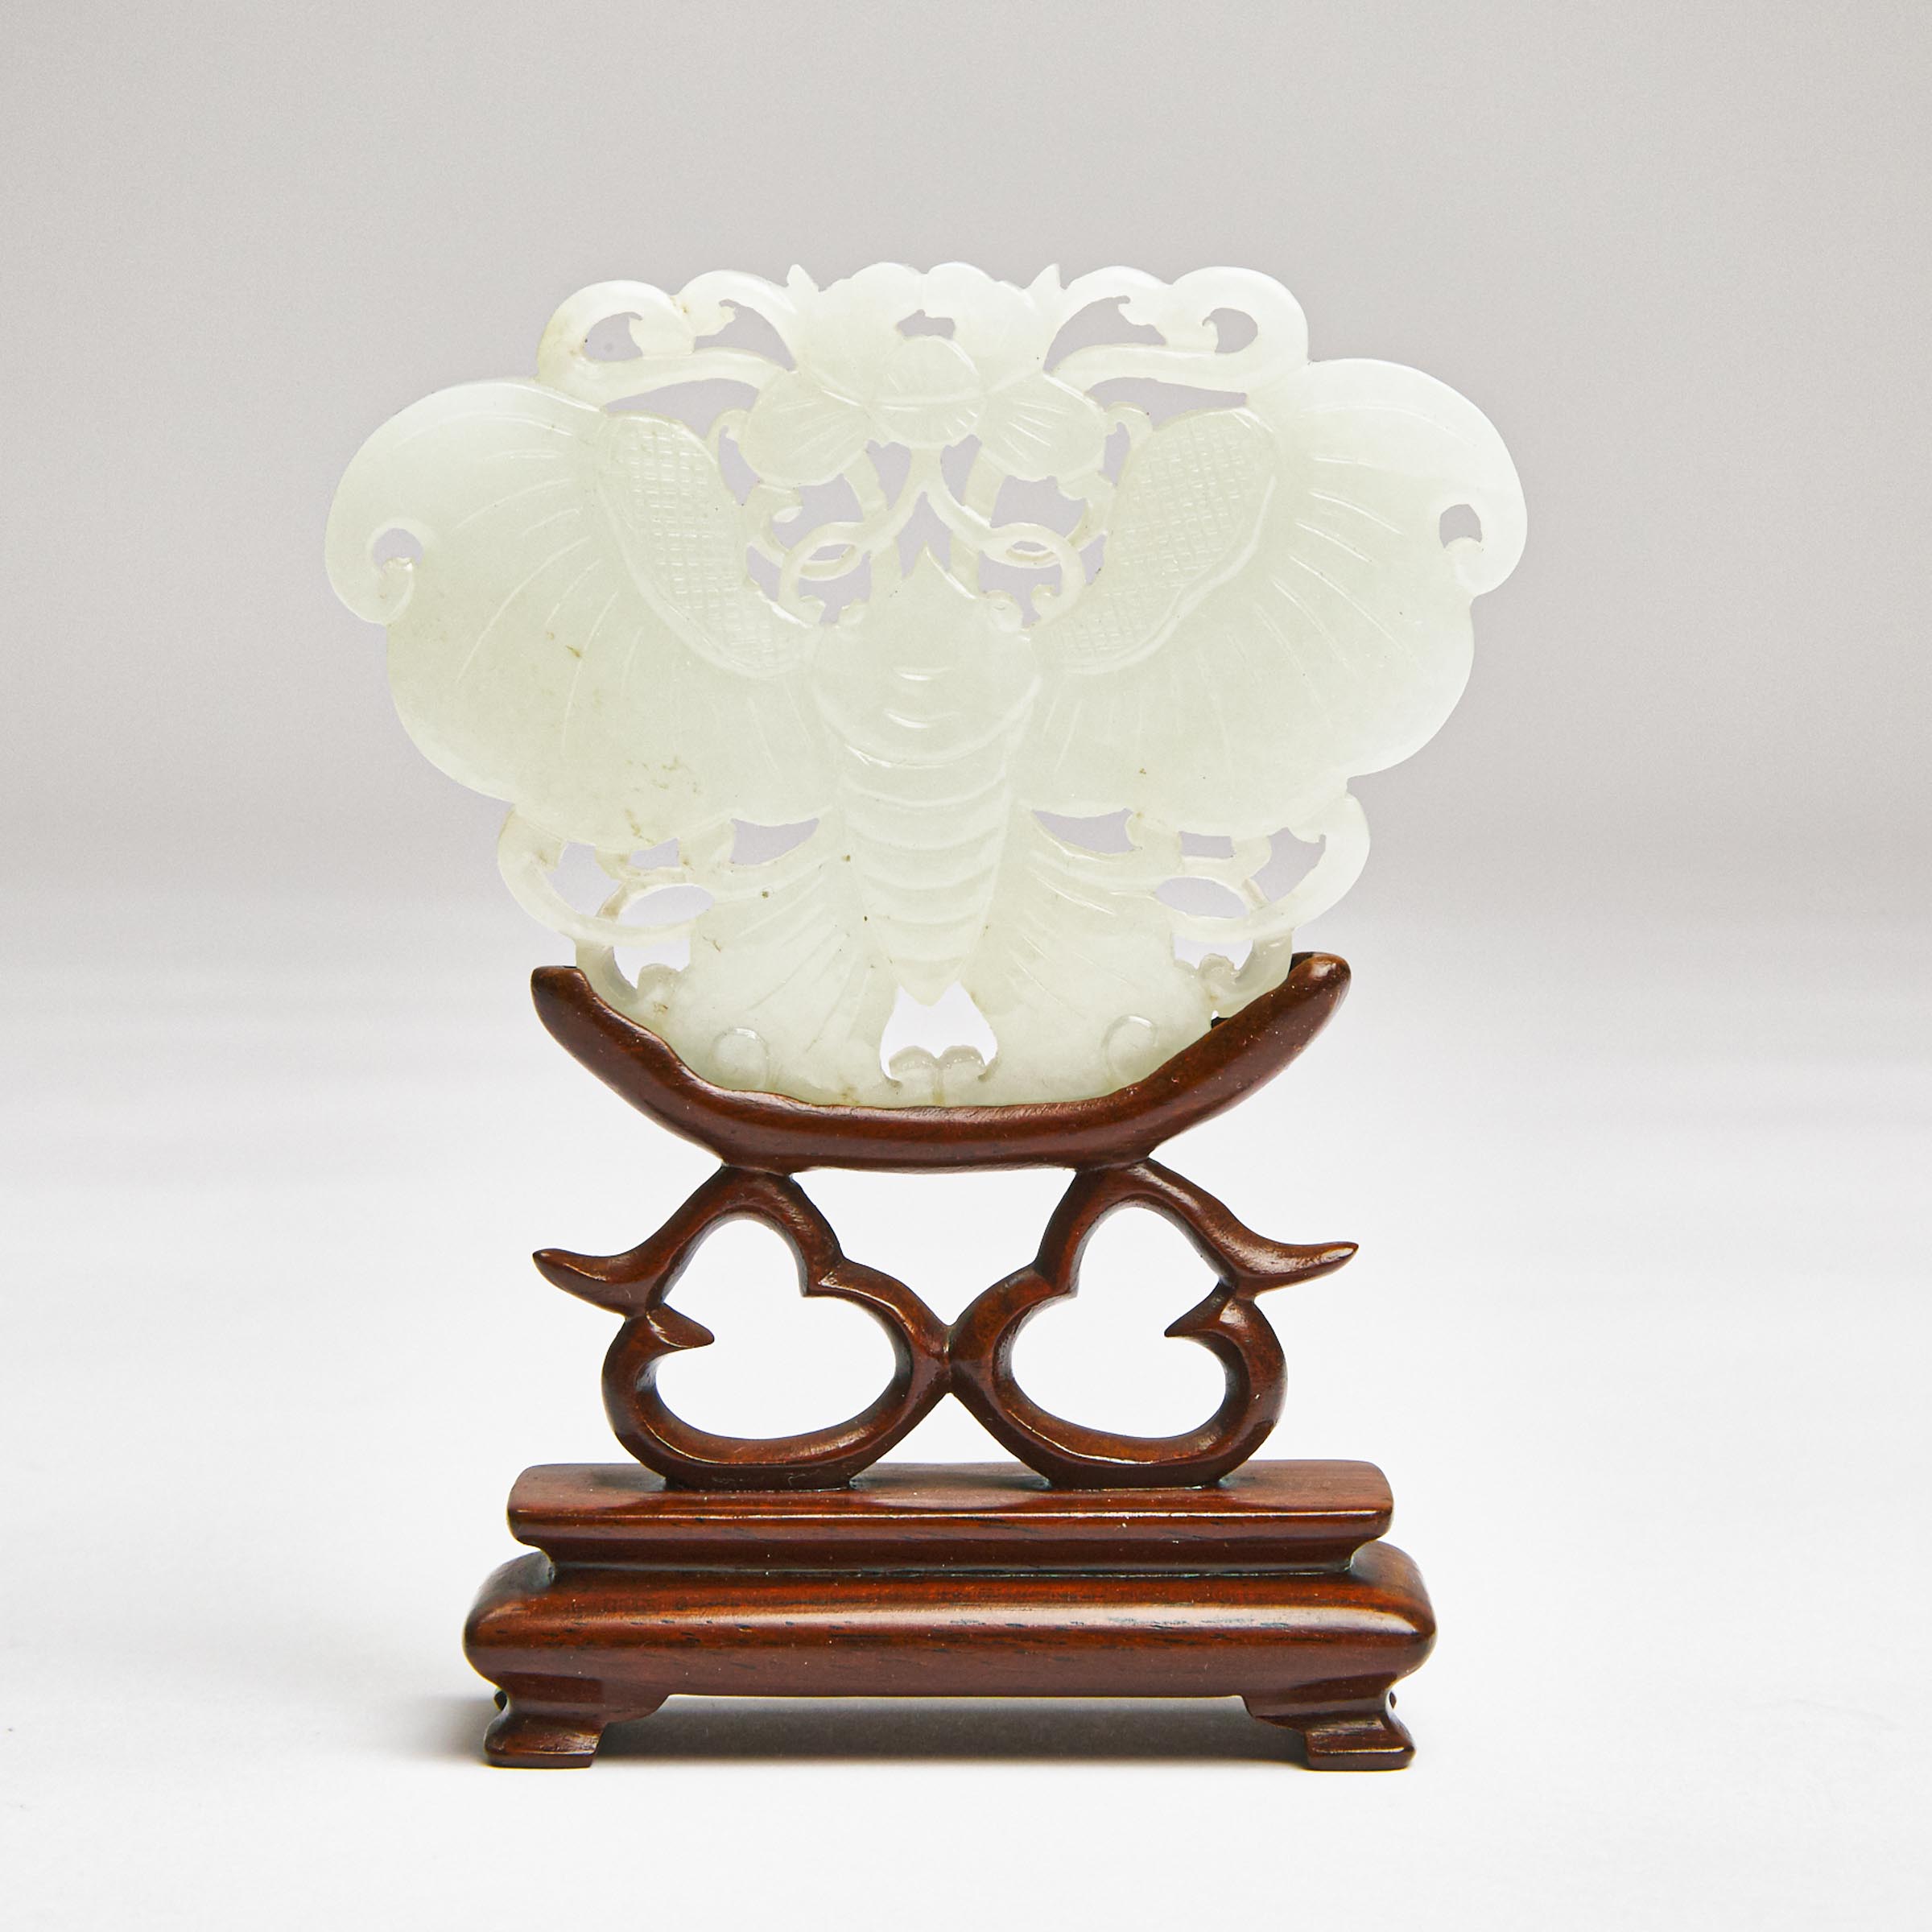 A White Jade 'Butterfly' Plaque, Qing Dynasty